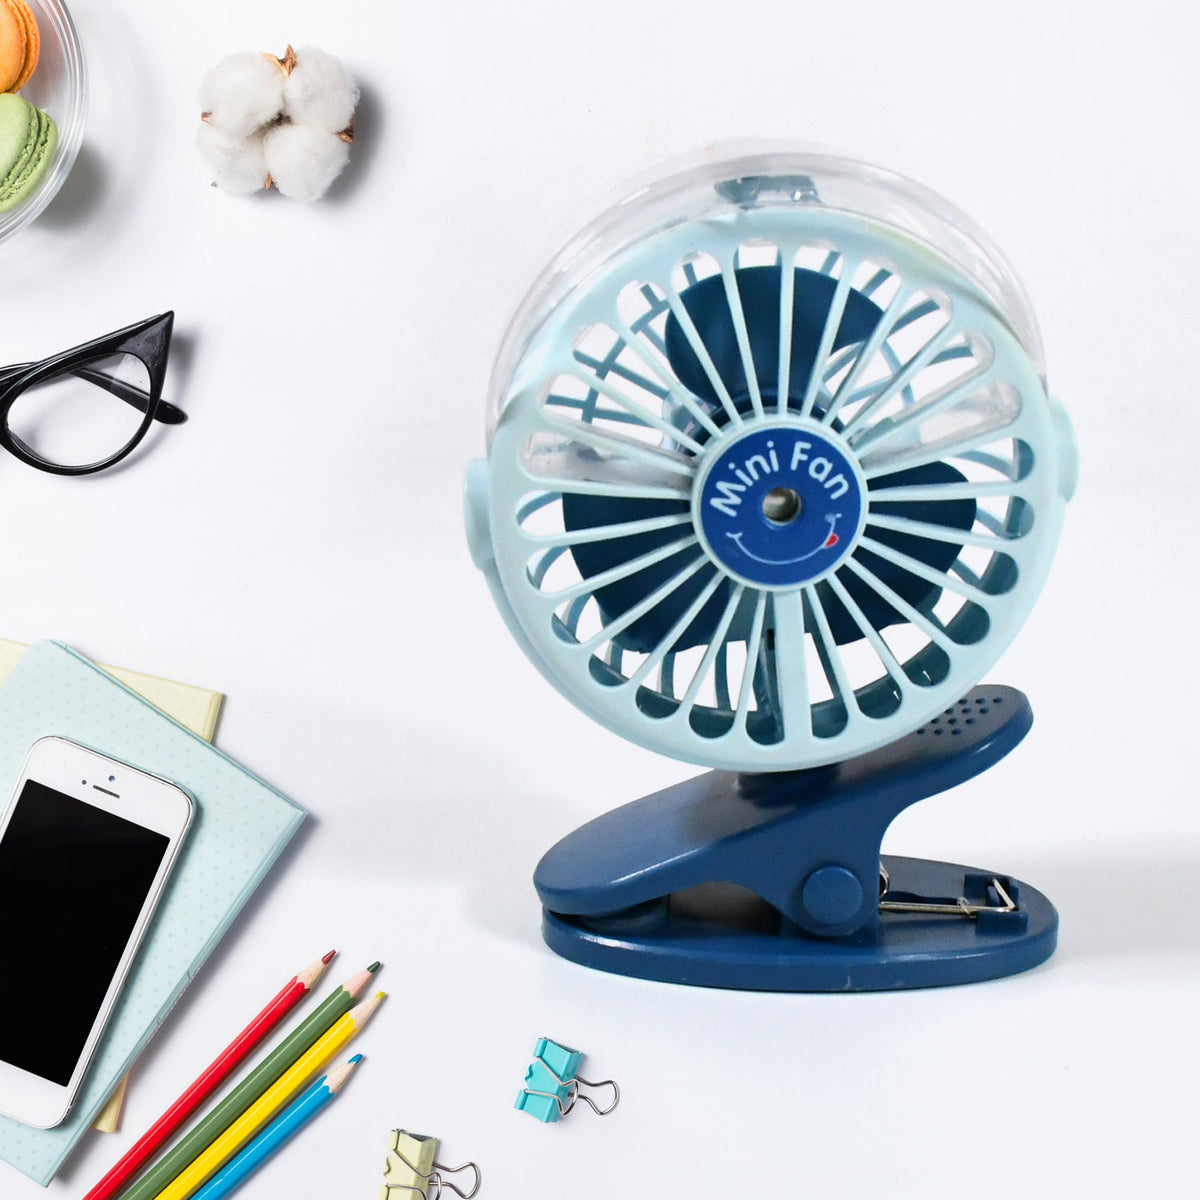 17930 Portable Clip-on Fan, Battery Operated, With Light & Spray, Small Yet Powerful USB Table Fan, 3-Speed Quiet Rechargeable Mini Desk Fan, 360° Rotation, Personal Cooling Fan for Home, Office, Camping